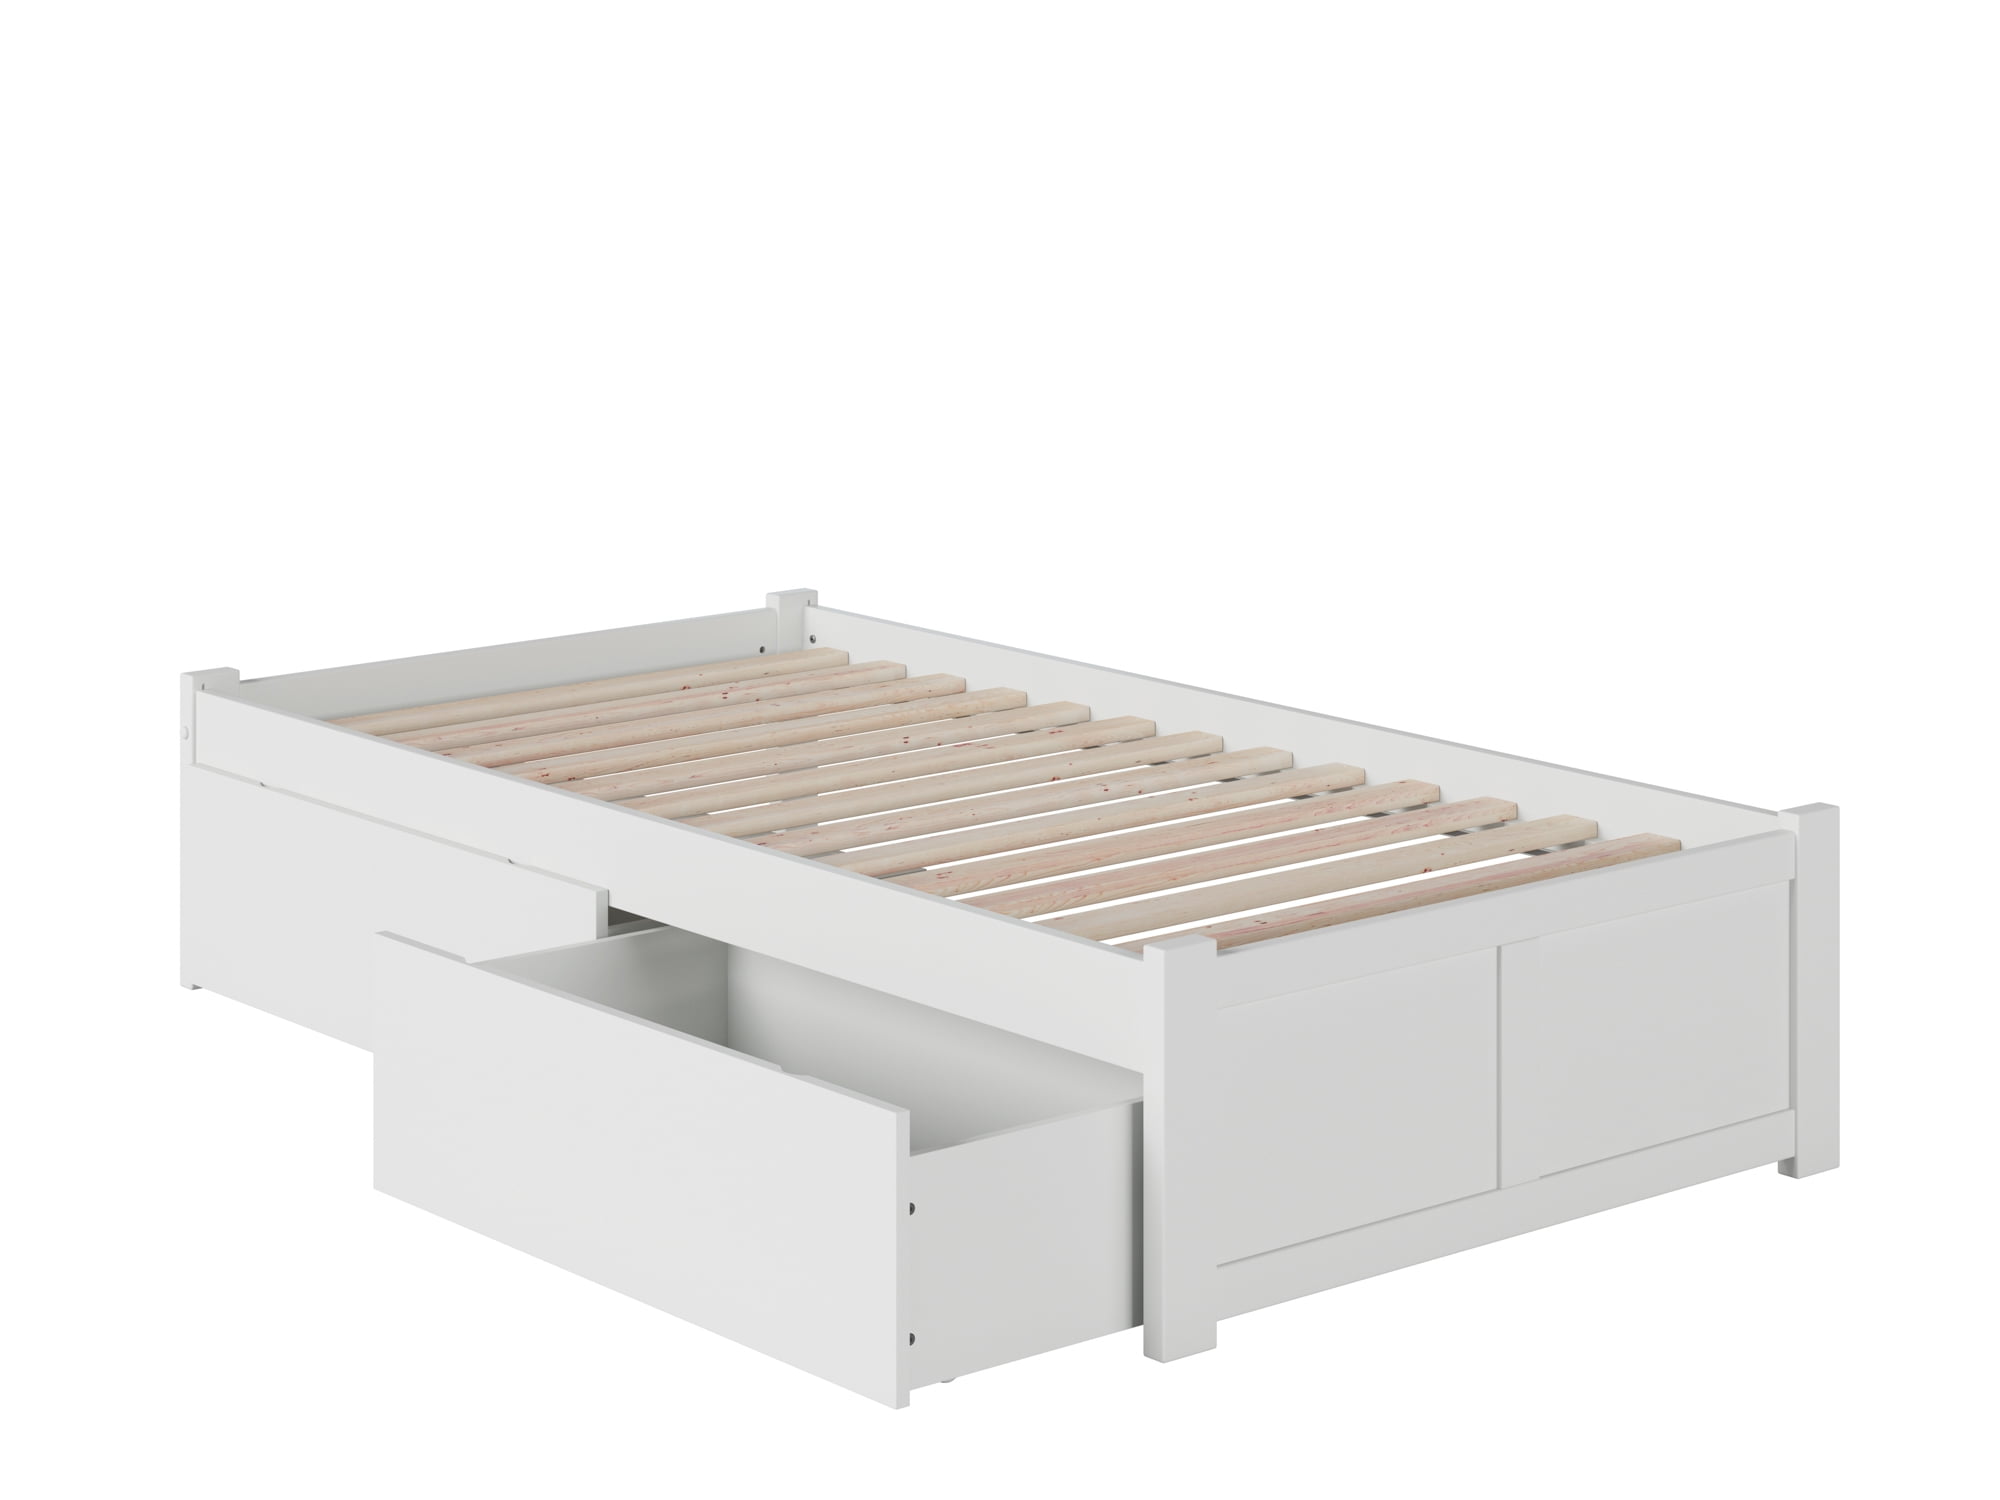 Ar8012112 Concord Flat Panel Foot Board With Urban Bed Drawers, White - Twin Extra Large